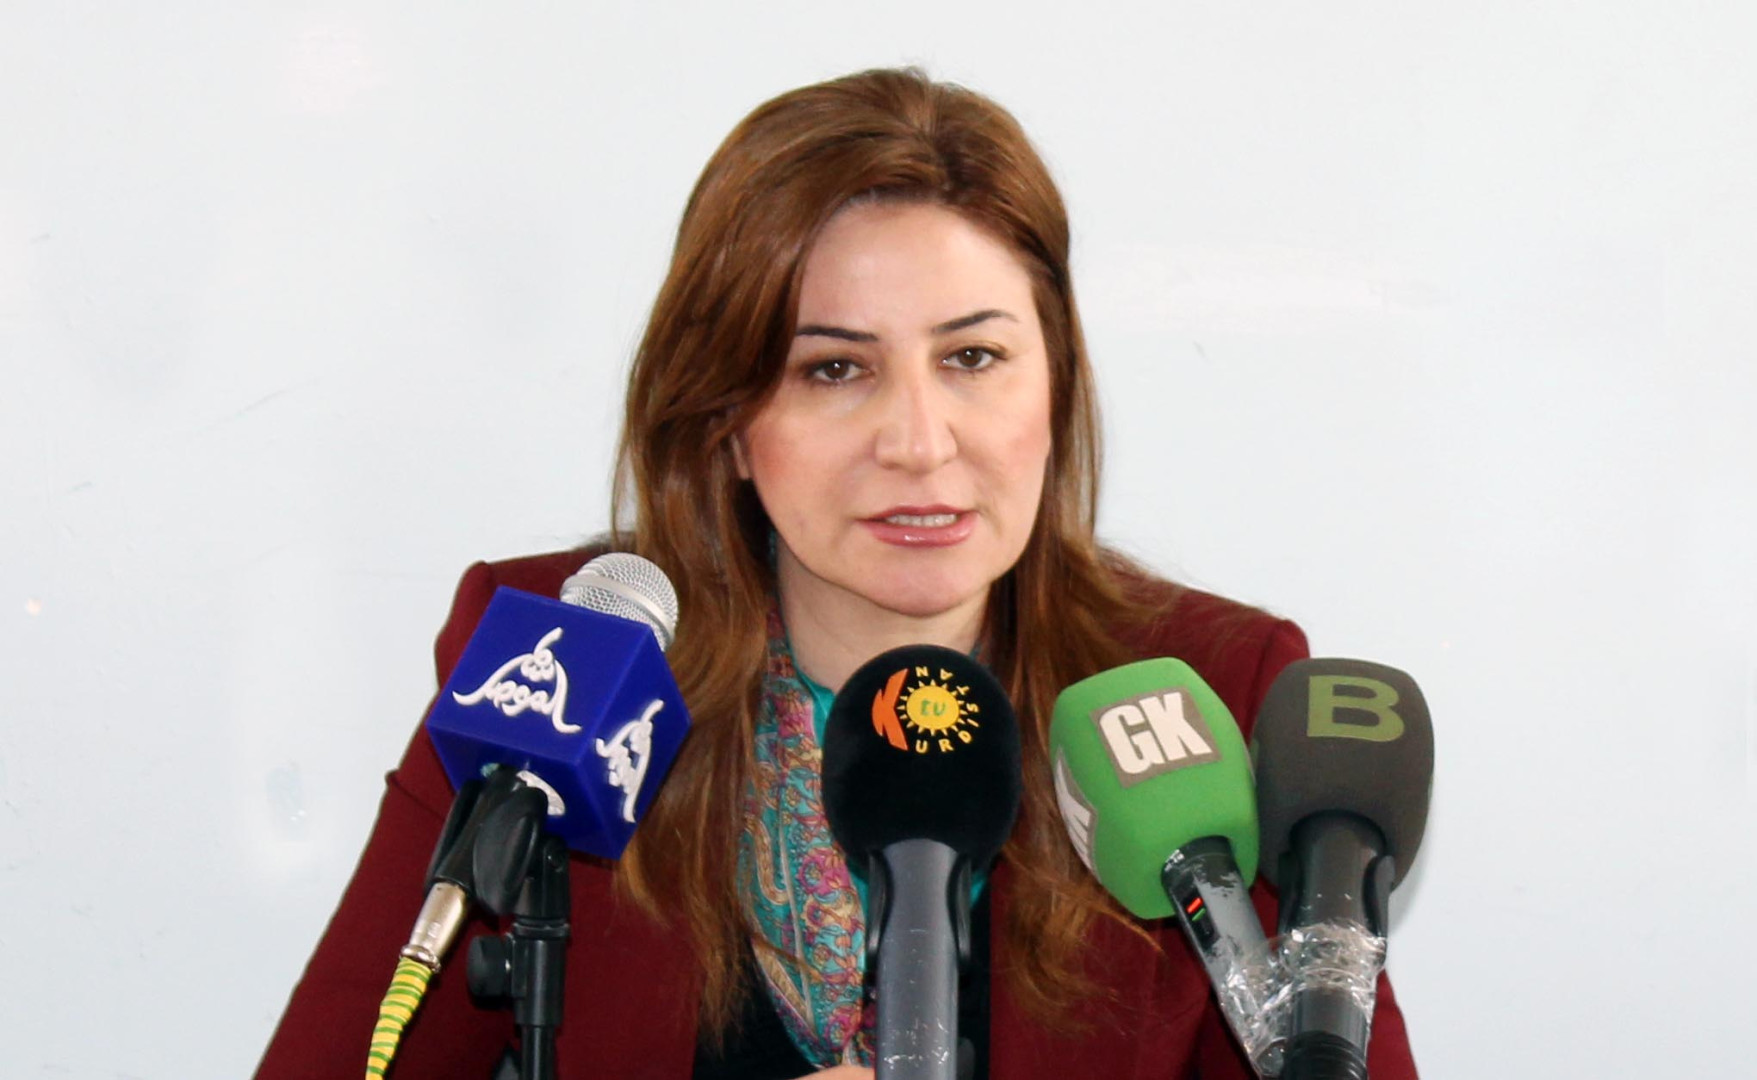 Iraqi Government struggles to remove foreign forces from Sinjar district, says KDP spokeswoman